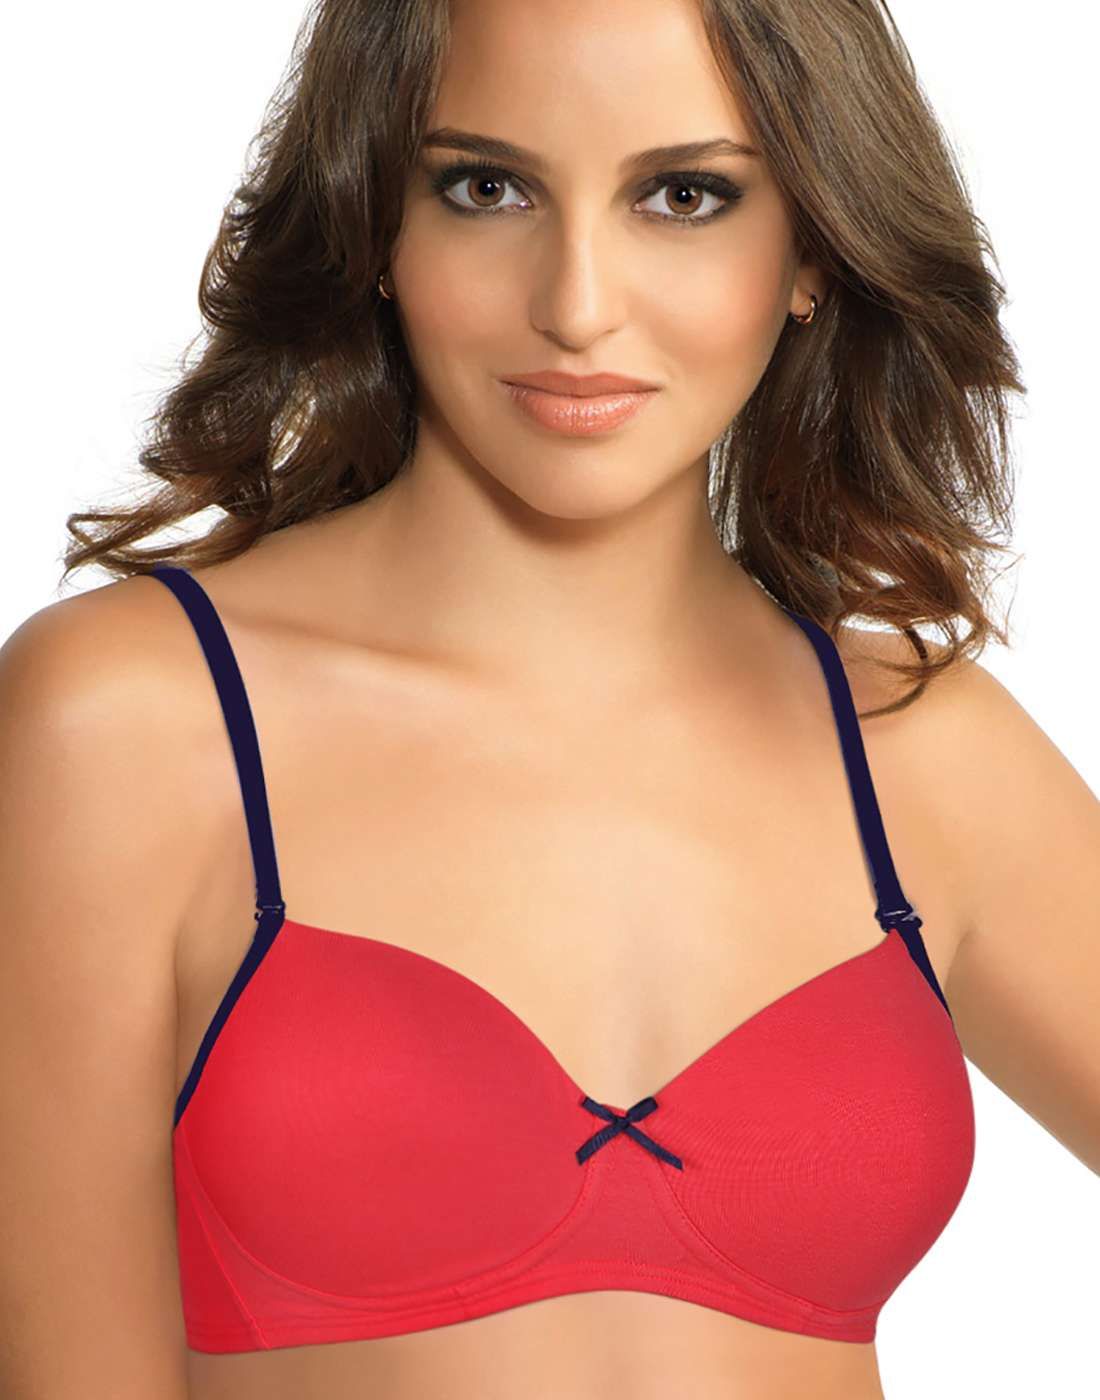 Amante Padded Non-Wired T-Shirt Bra With Detachable Straps - Pink (36B)